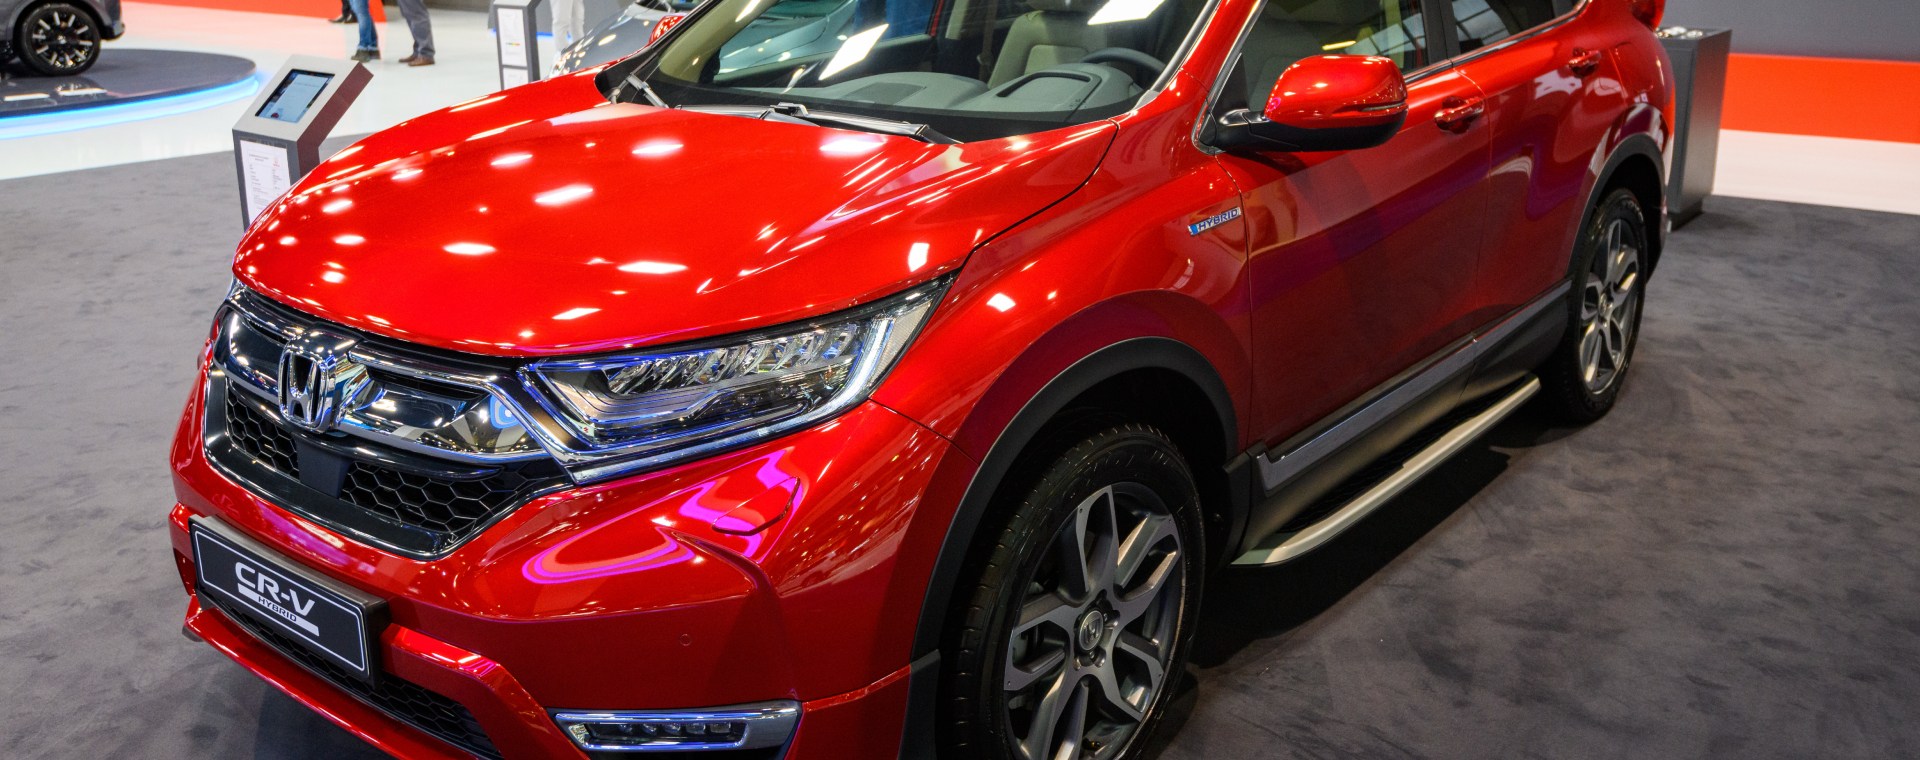 A red Honda CR-V at Brussels Expo on January 9, 2020 in Brussels, Belgium.